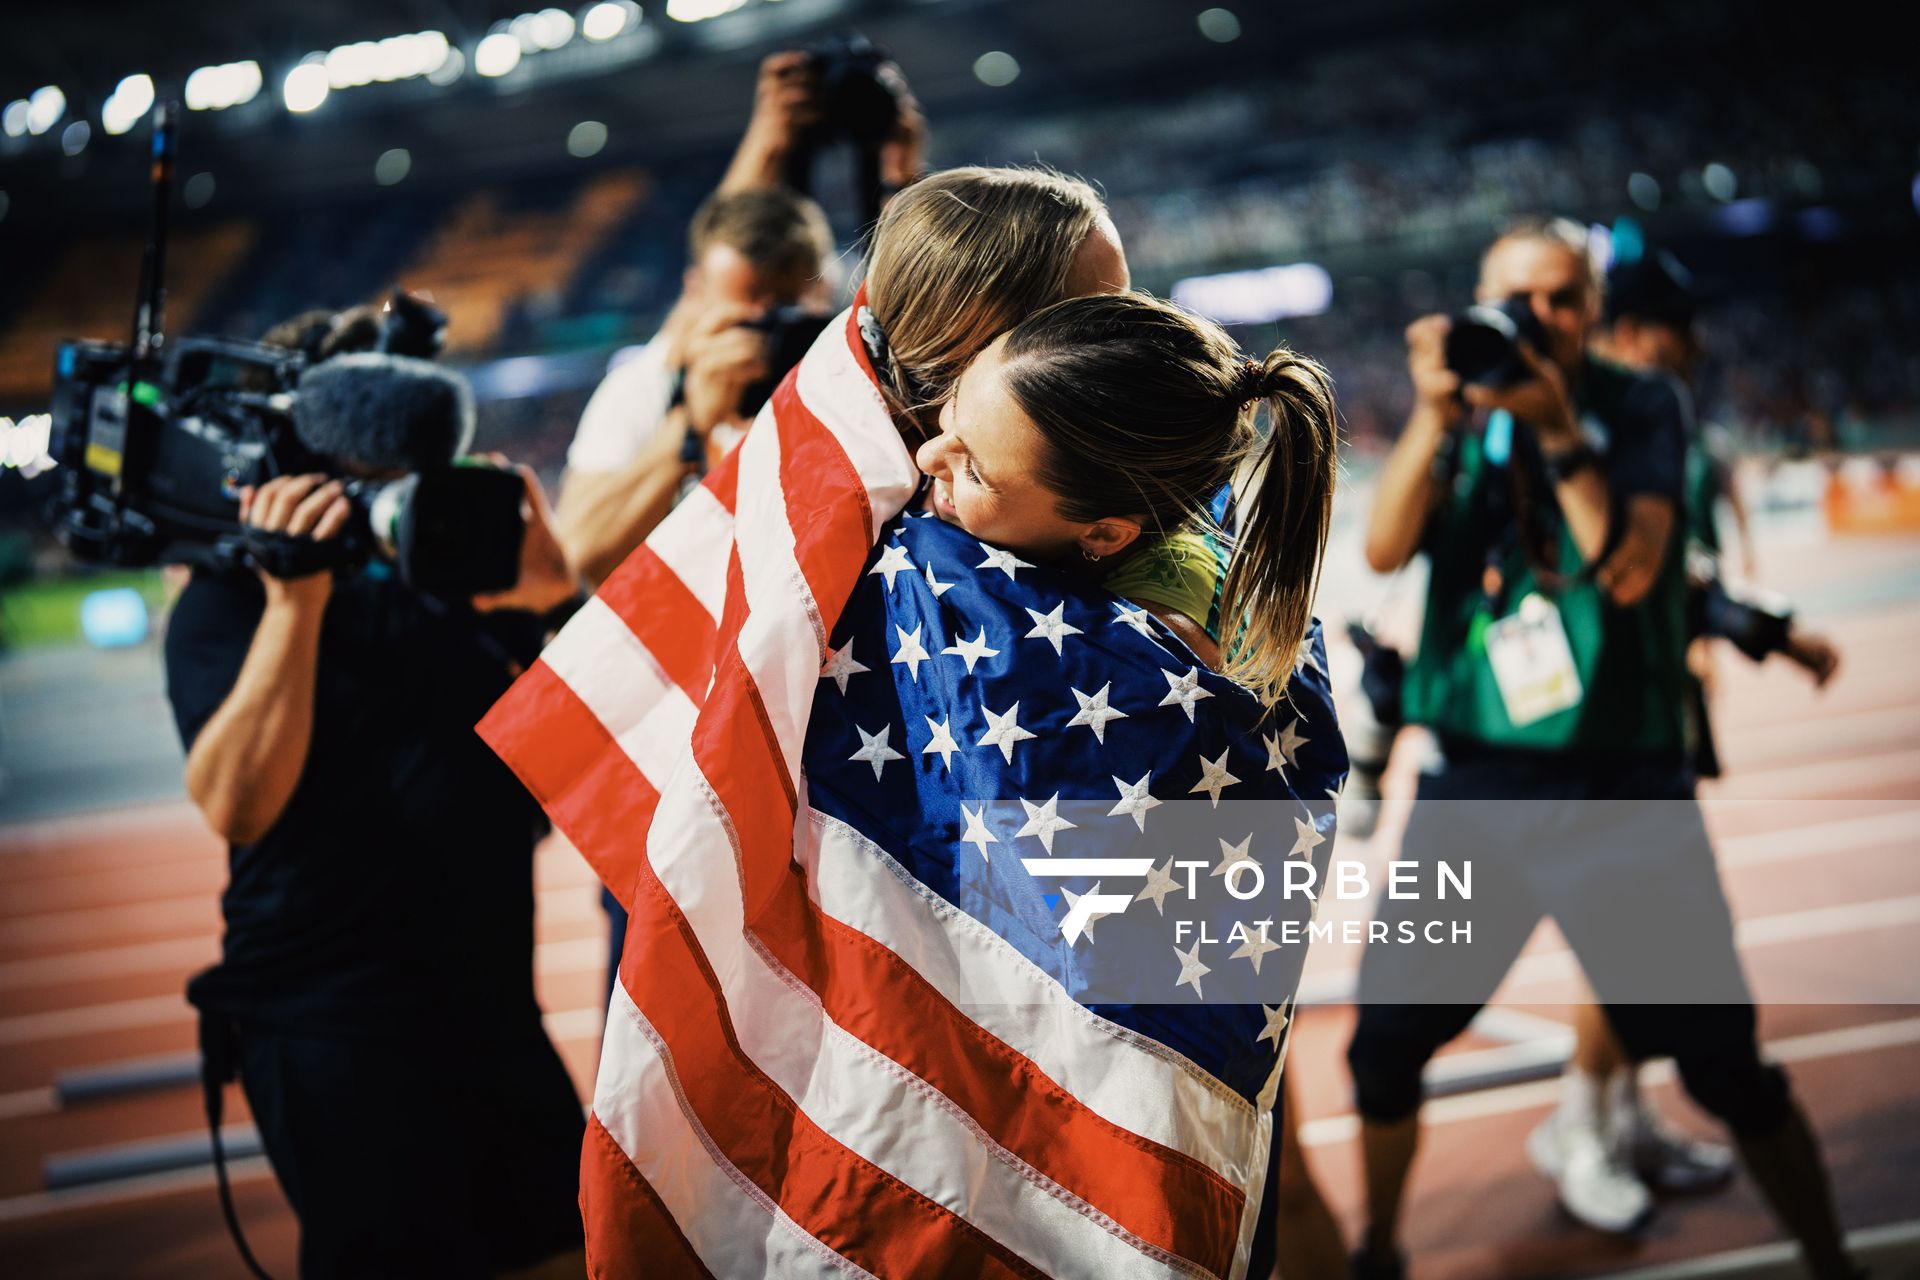 Katie Moon (USA/United States) and Nina Kennedy (AUS/Australia) on Day 5 of the World Athletics Championships Budapest 23 at the National Athletics Centre in Budapest, Hungary on August 23, 2023.